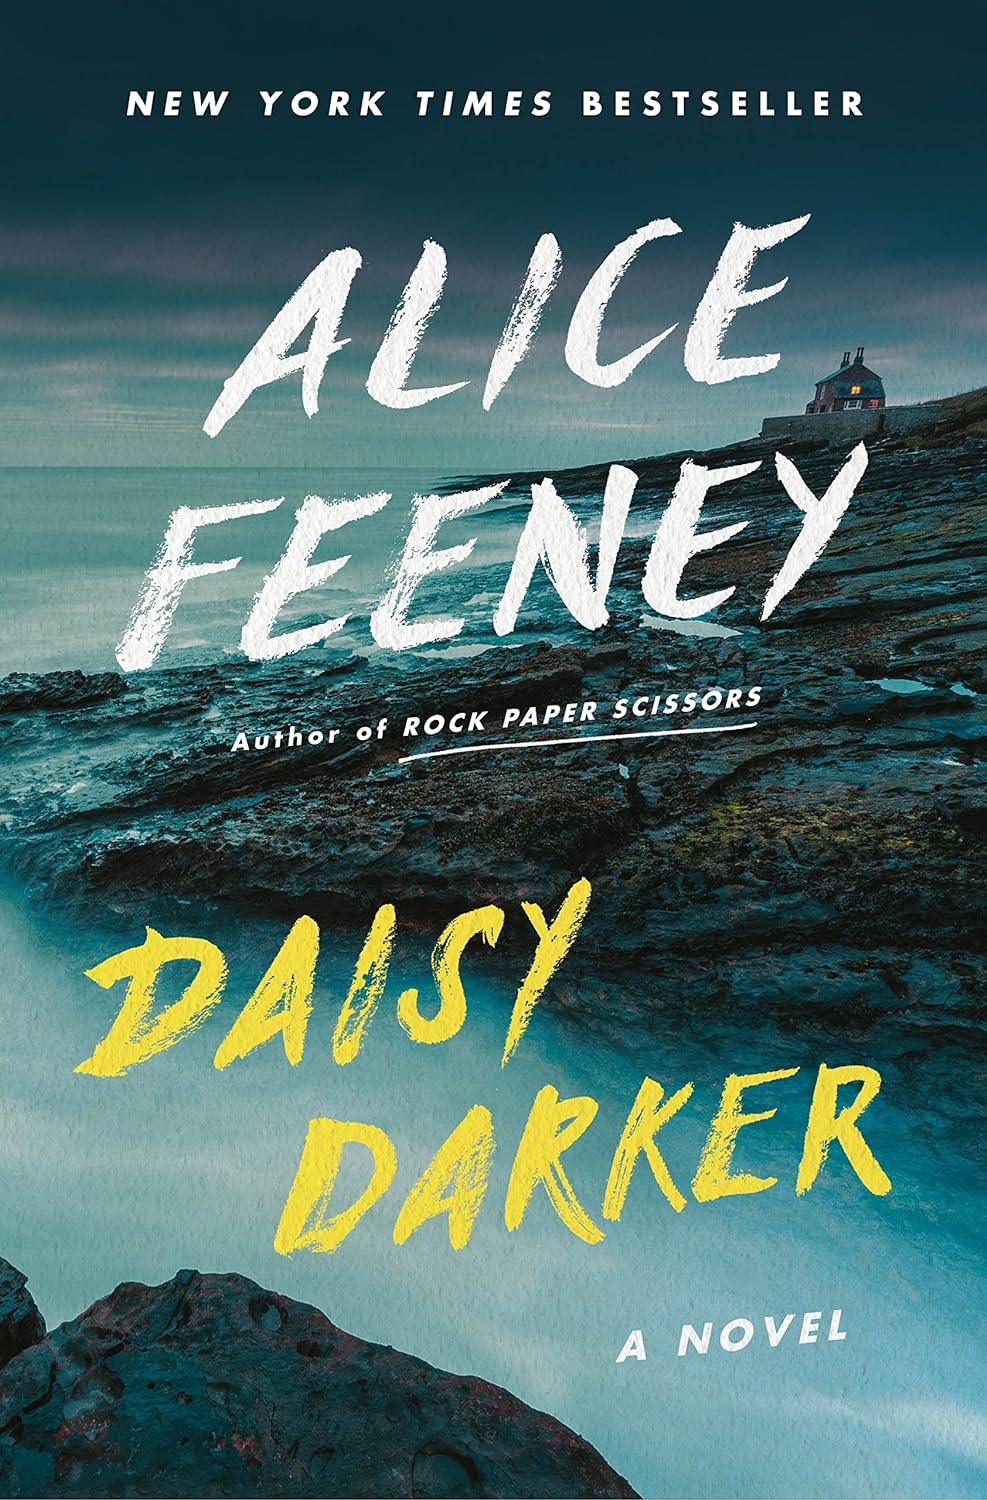 Graphic image of the book cover for Daisy Darker